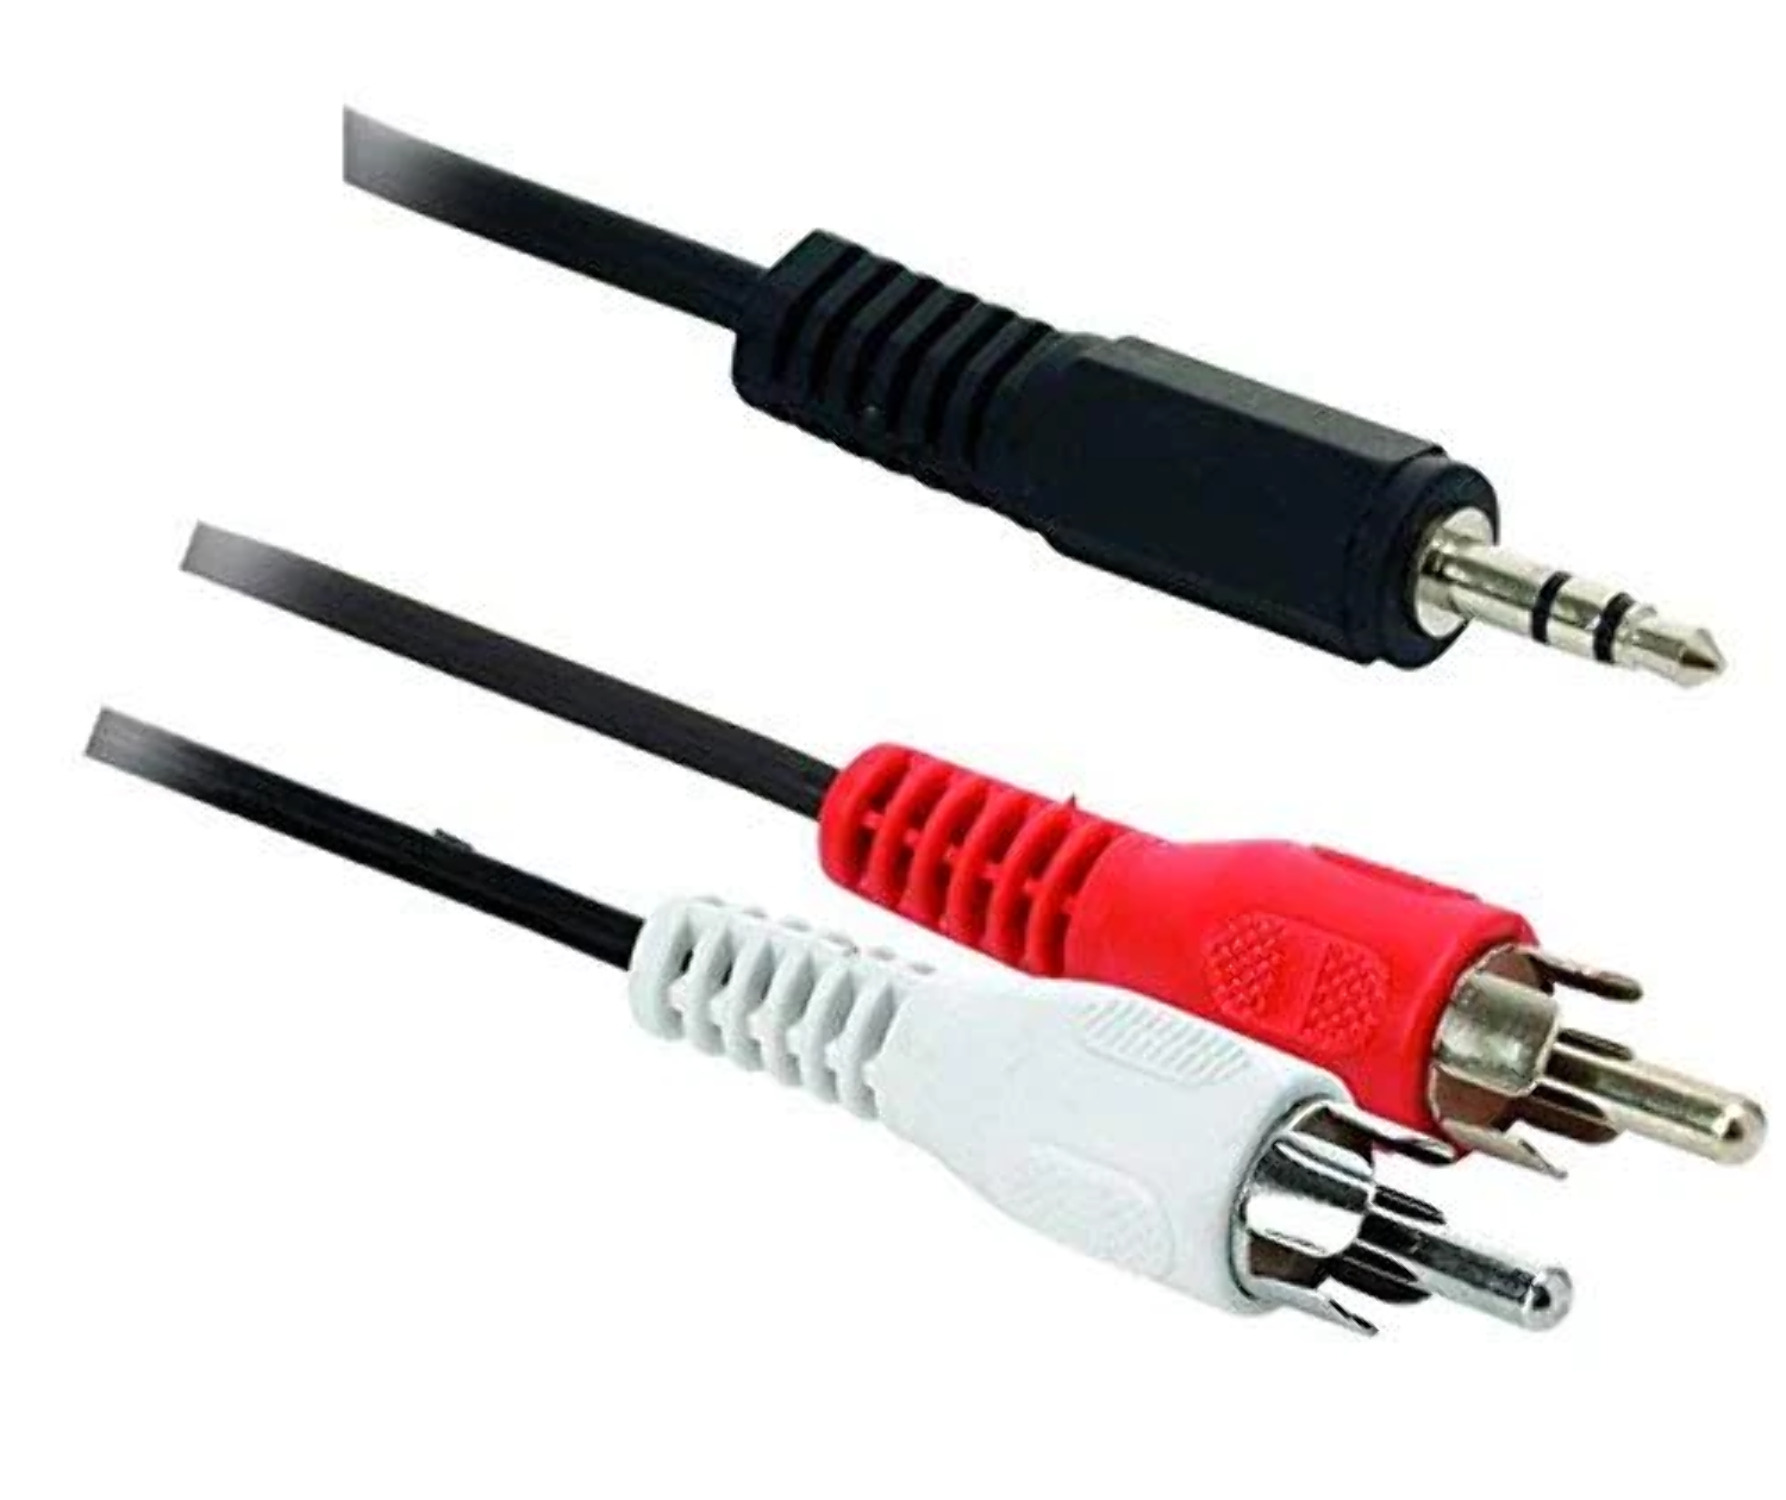 255-037 STEREN 6IN 2RCA PLUGS-I 3.5MM PLUG Y CABLE - image 1 of 2